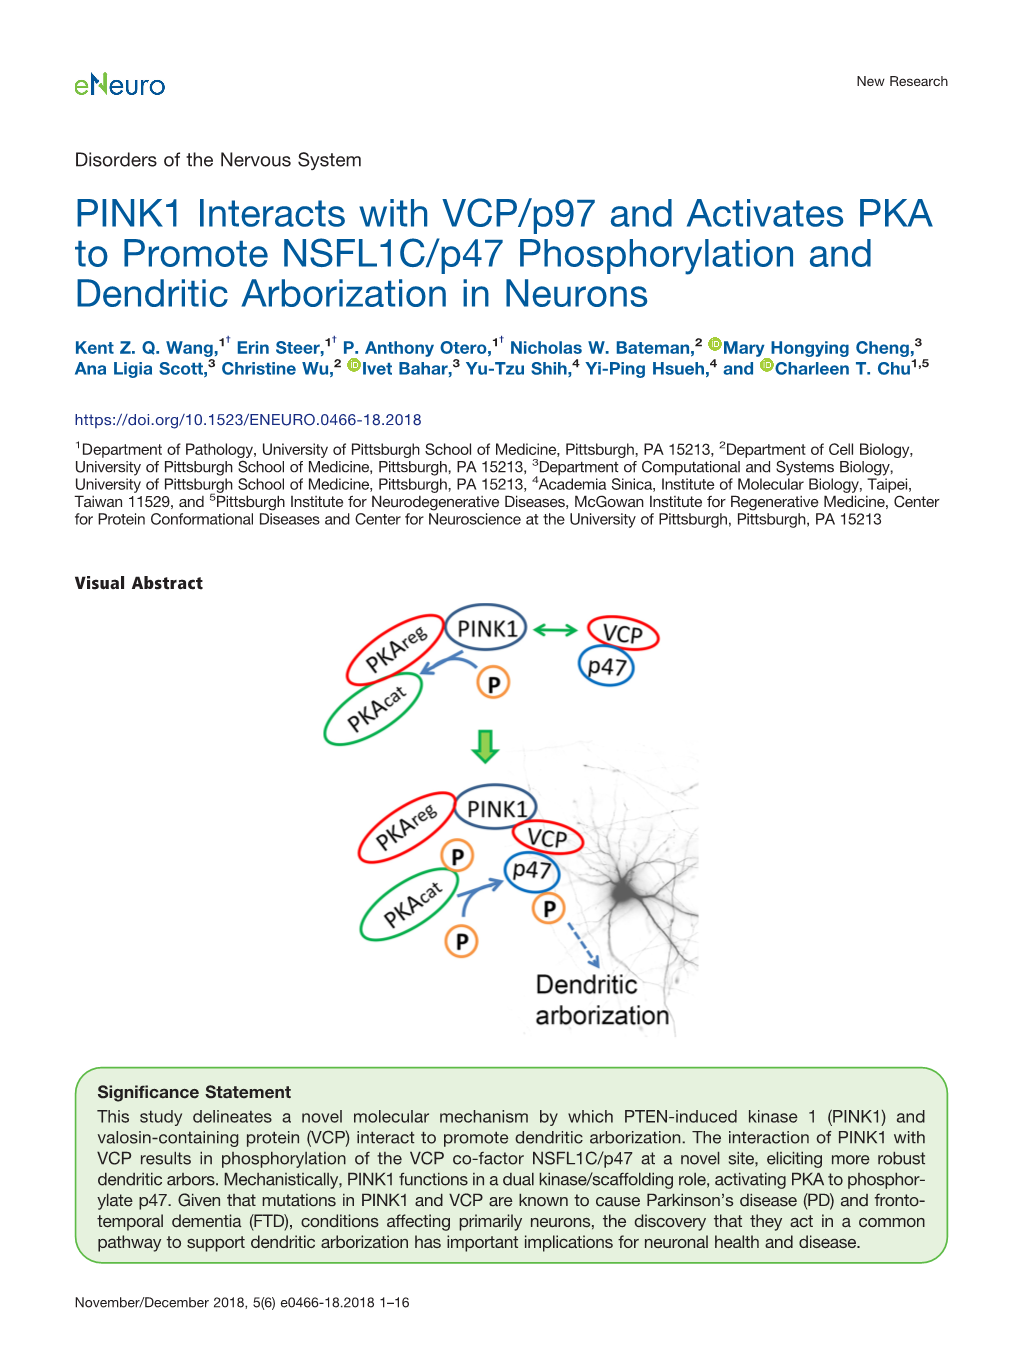 PINK1 Interacts with VCP/P97 and Activates PKA to Promote NSFL1C/P47 Phosphorylation and Dendritic Arborization in Neurons